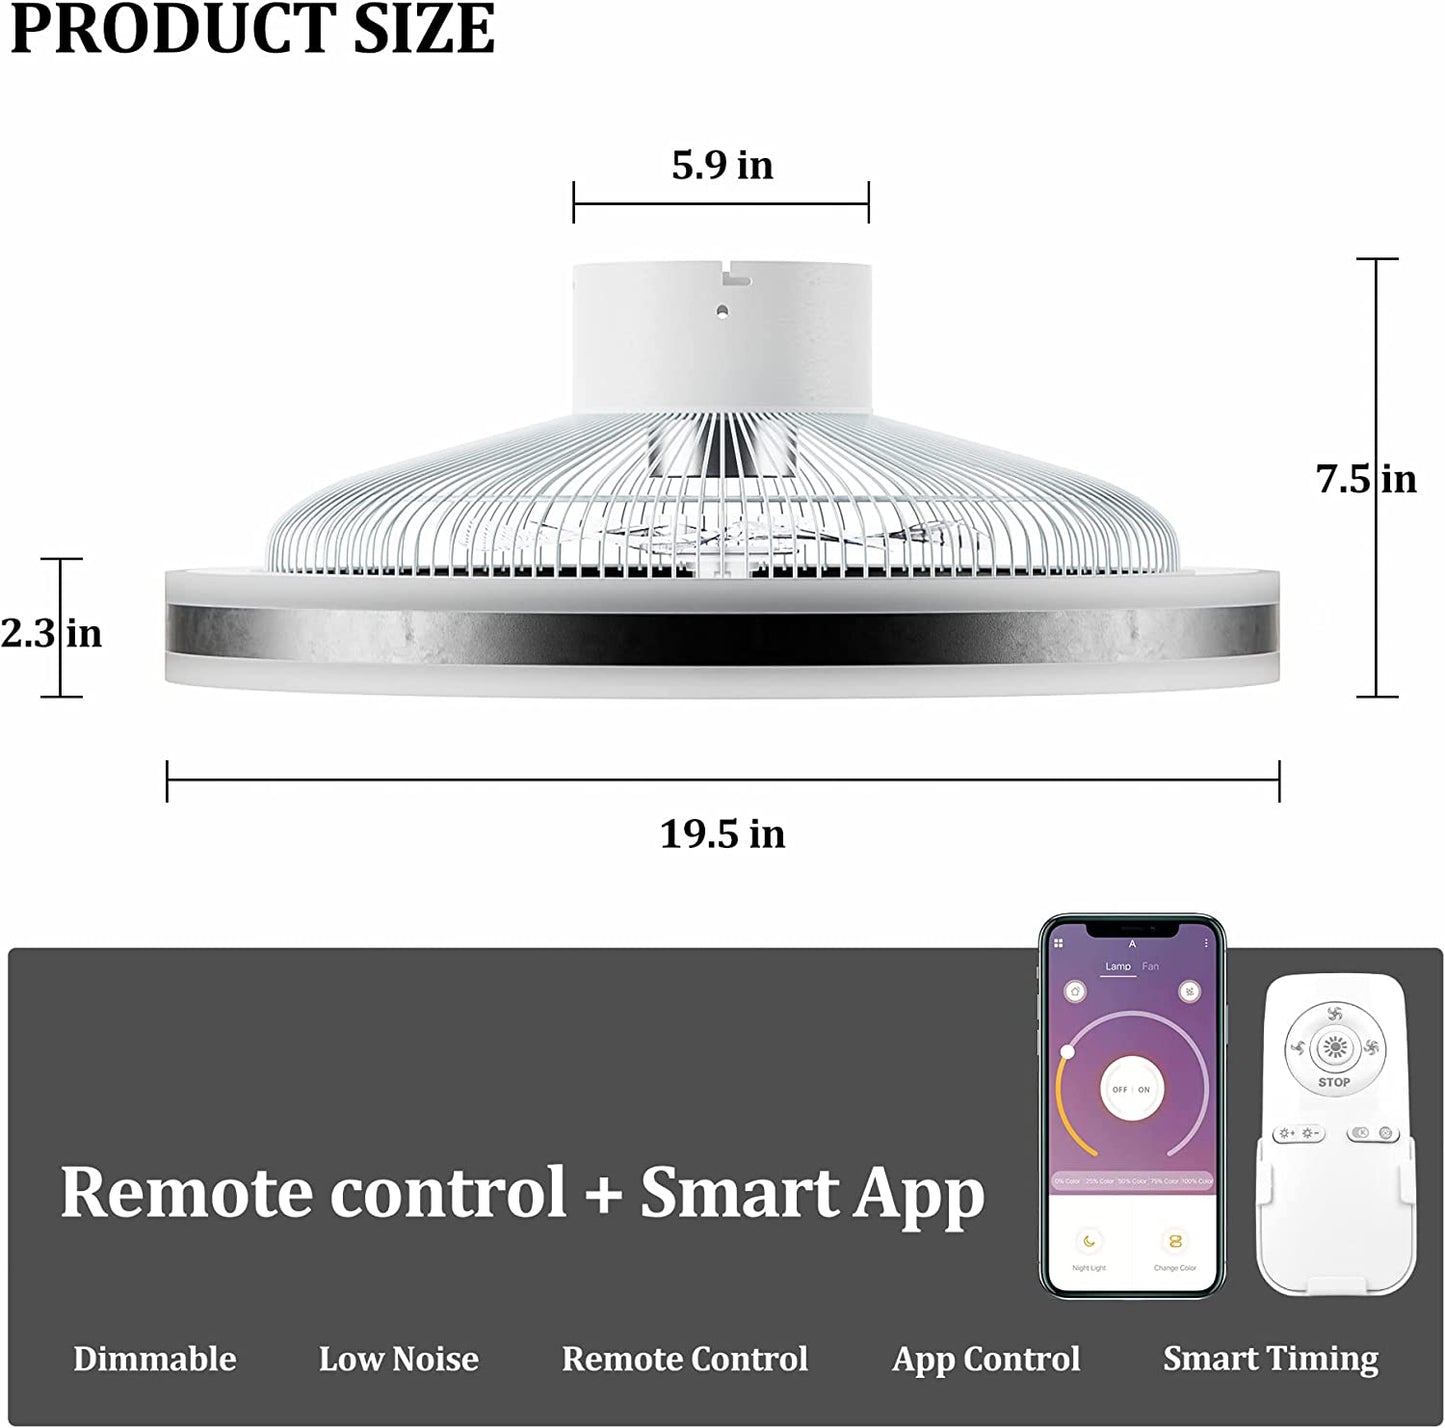 Ceiling Fan with Lights and Remote Control, Modern Enclosed Bladeless Ceiling Fan, Dimmable 3 Color 3 Speeds Timing, Indoor Flush Mount Low Profile Fan for Kids Room Bedroom Living Room